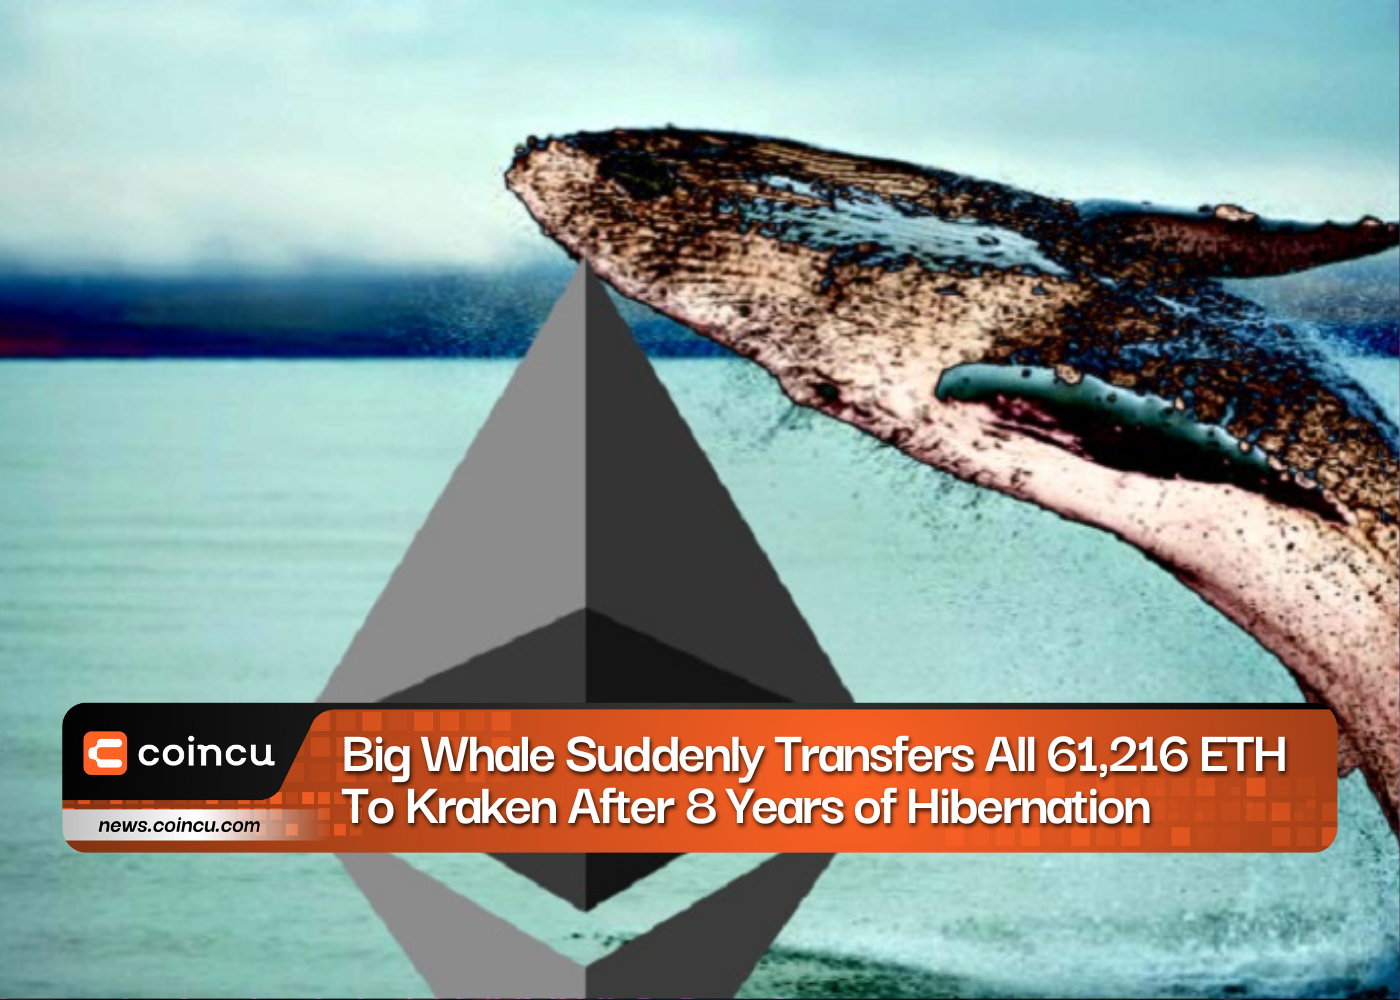 Big Whale Suddenly Transfers All 61,216 ETH To Kraken After 8 Years Of Hibernation